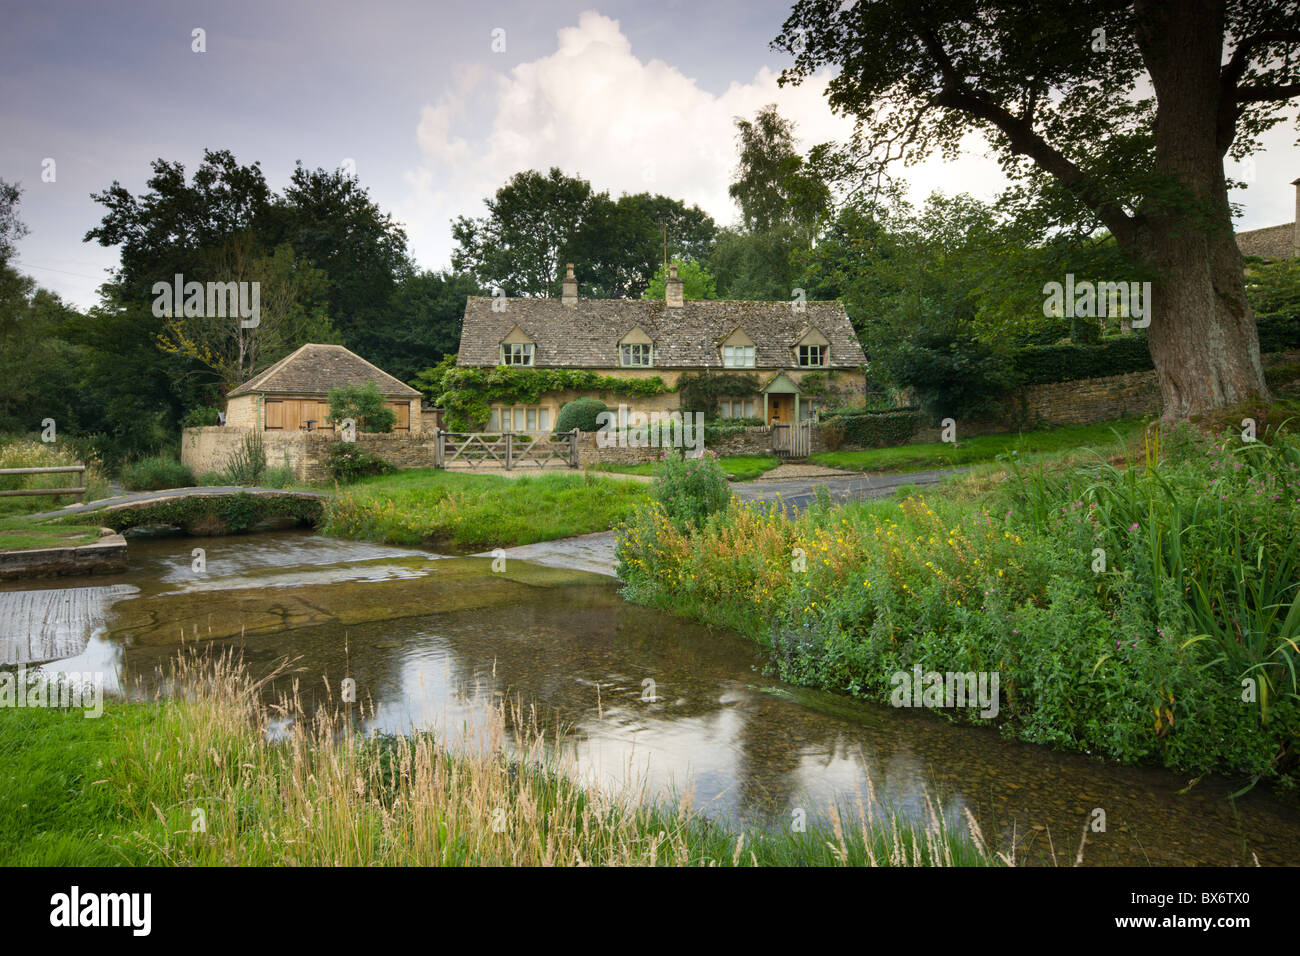 Cottage beside the River Eye in the picturesque Cotswold village of Upper Slaughter, Gloucestershire, England. Stock Photo